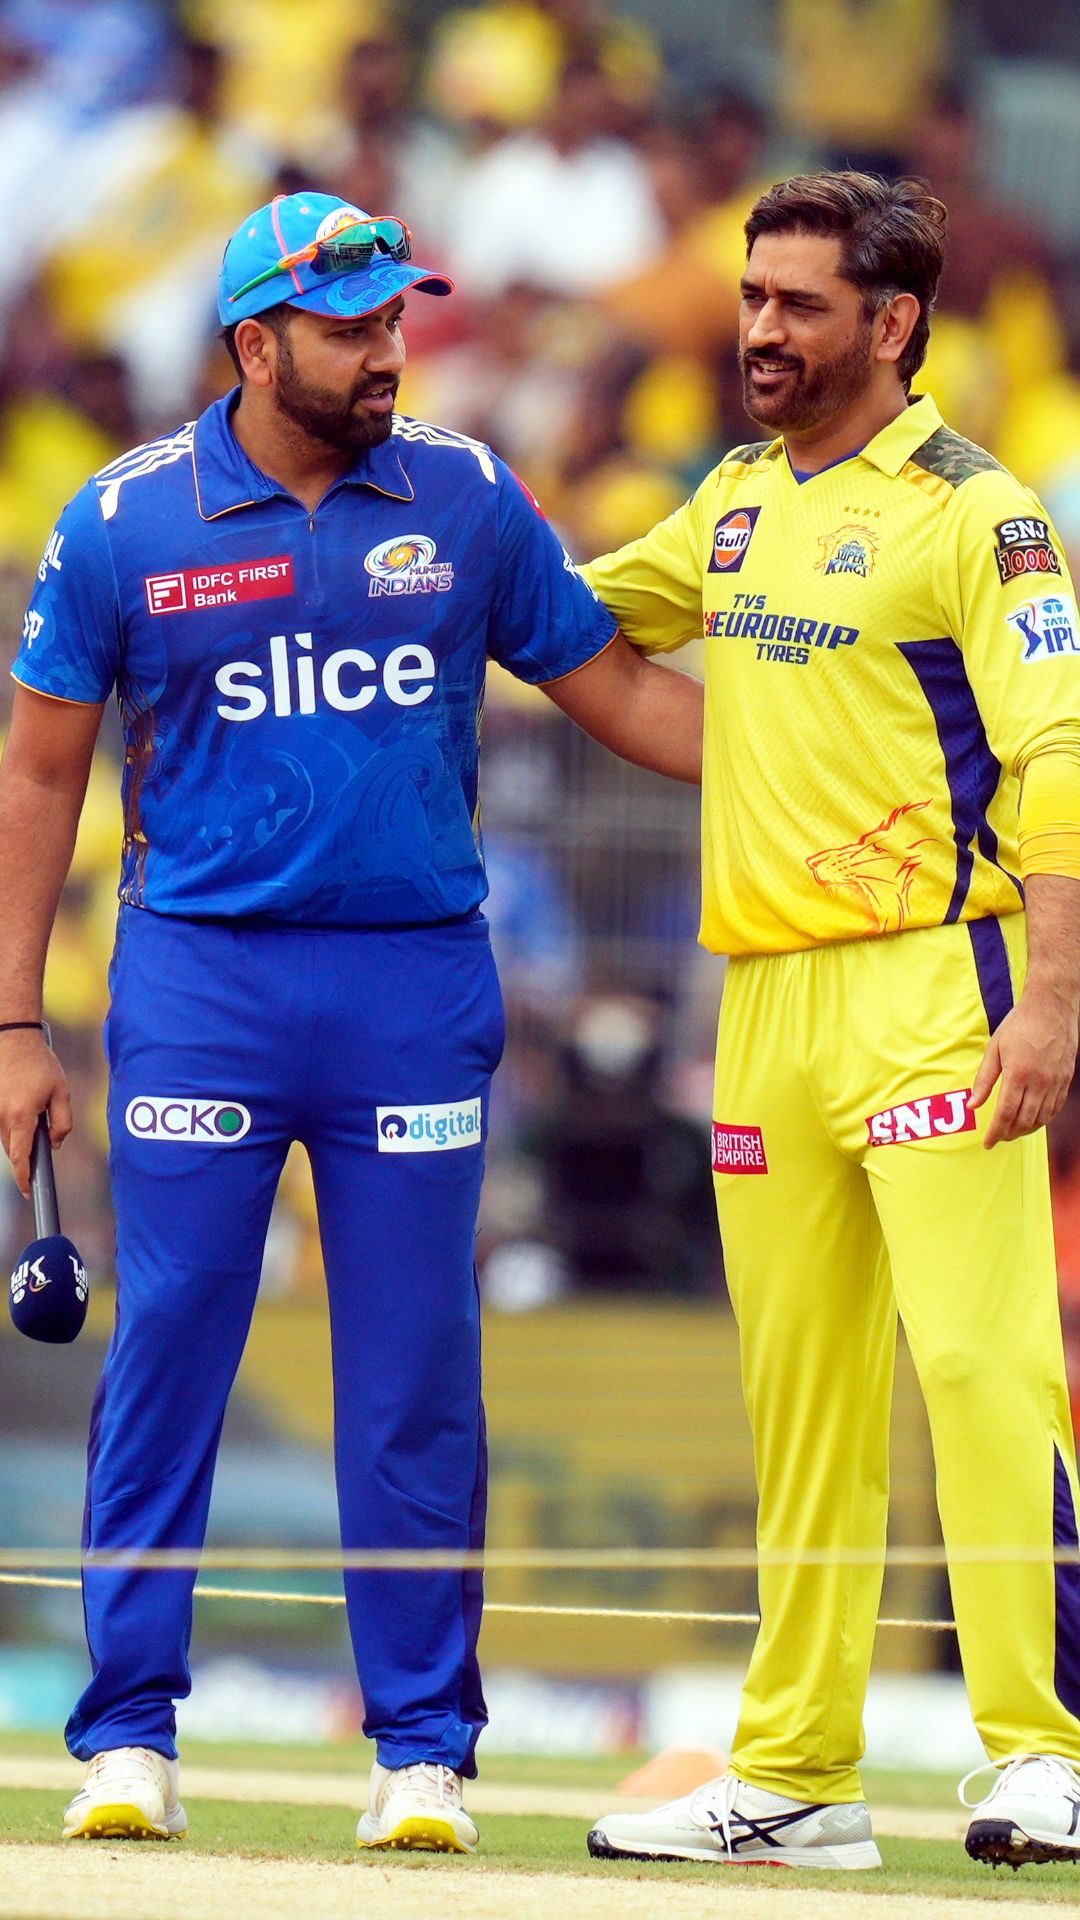 Top 10 teams to hit most sixes in IPL history feat MI and CSK